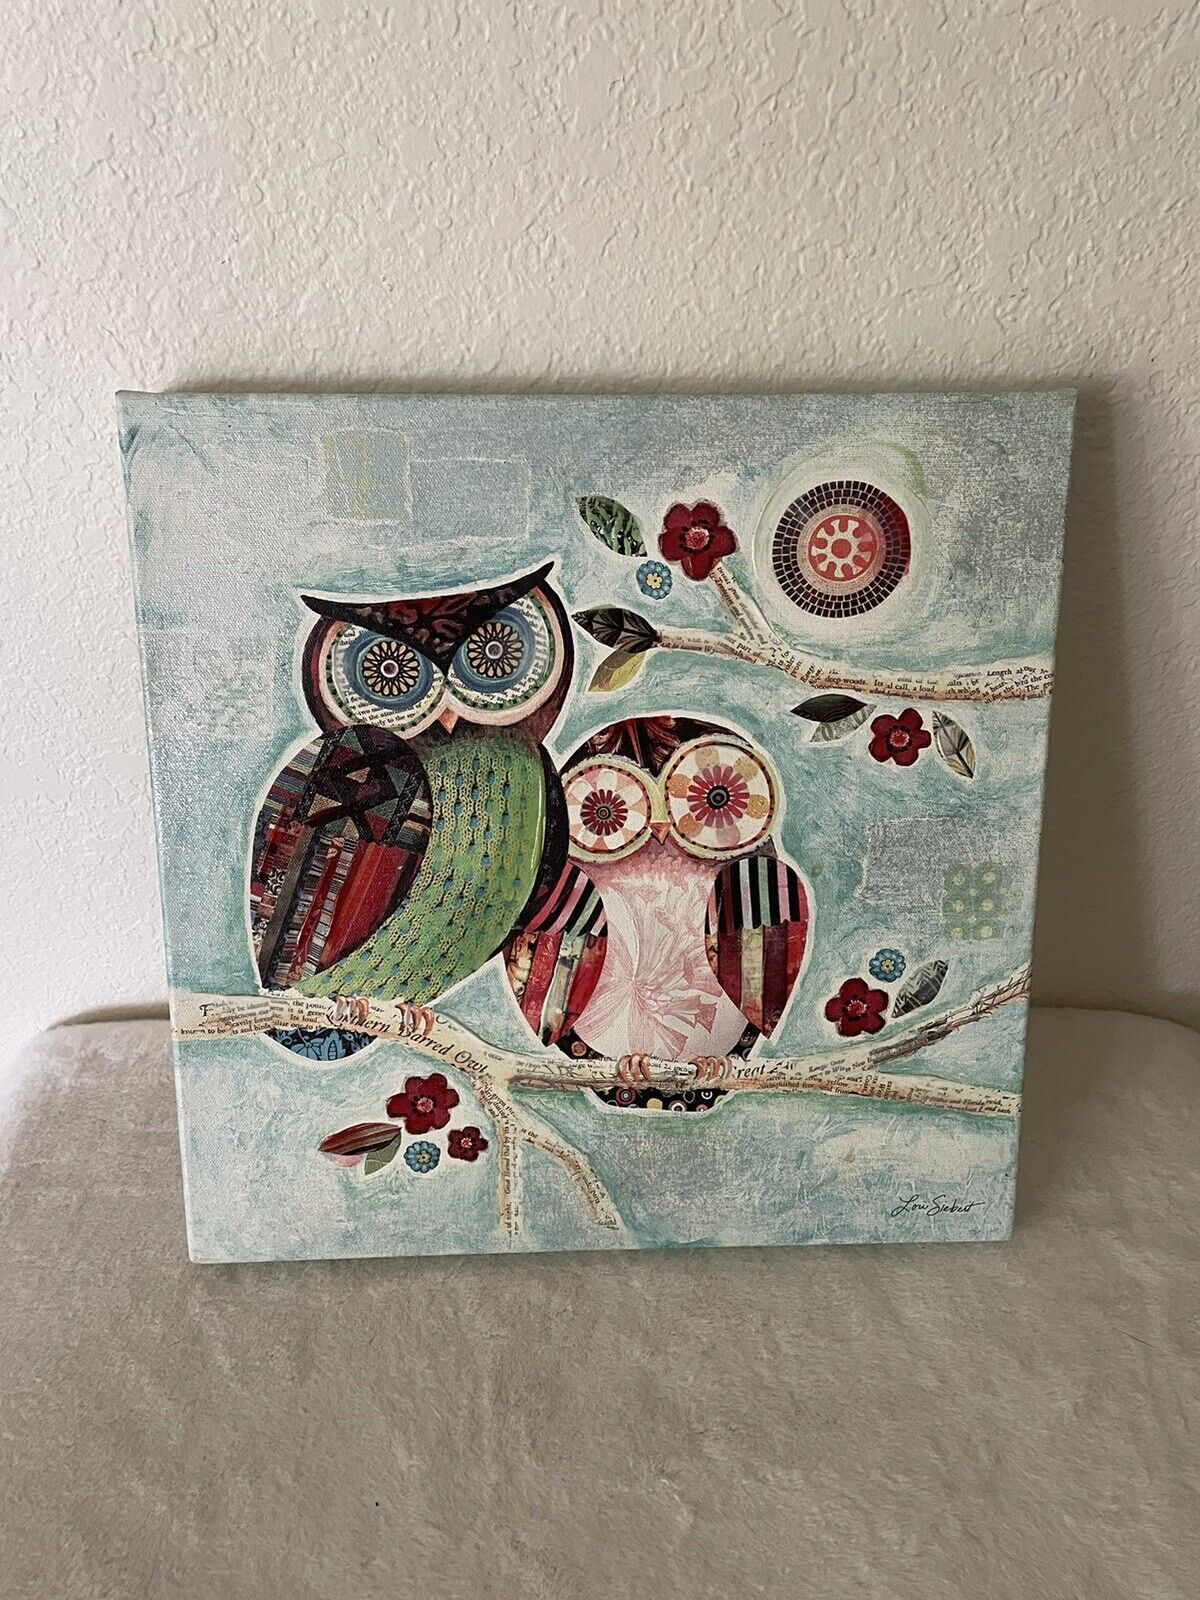 Lori Siebert Hand painted Giclee On Canvas With Owls